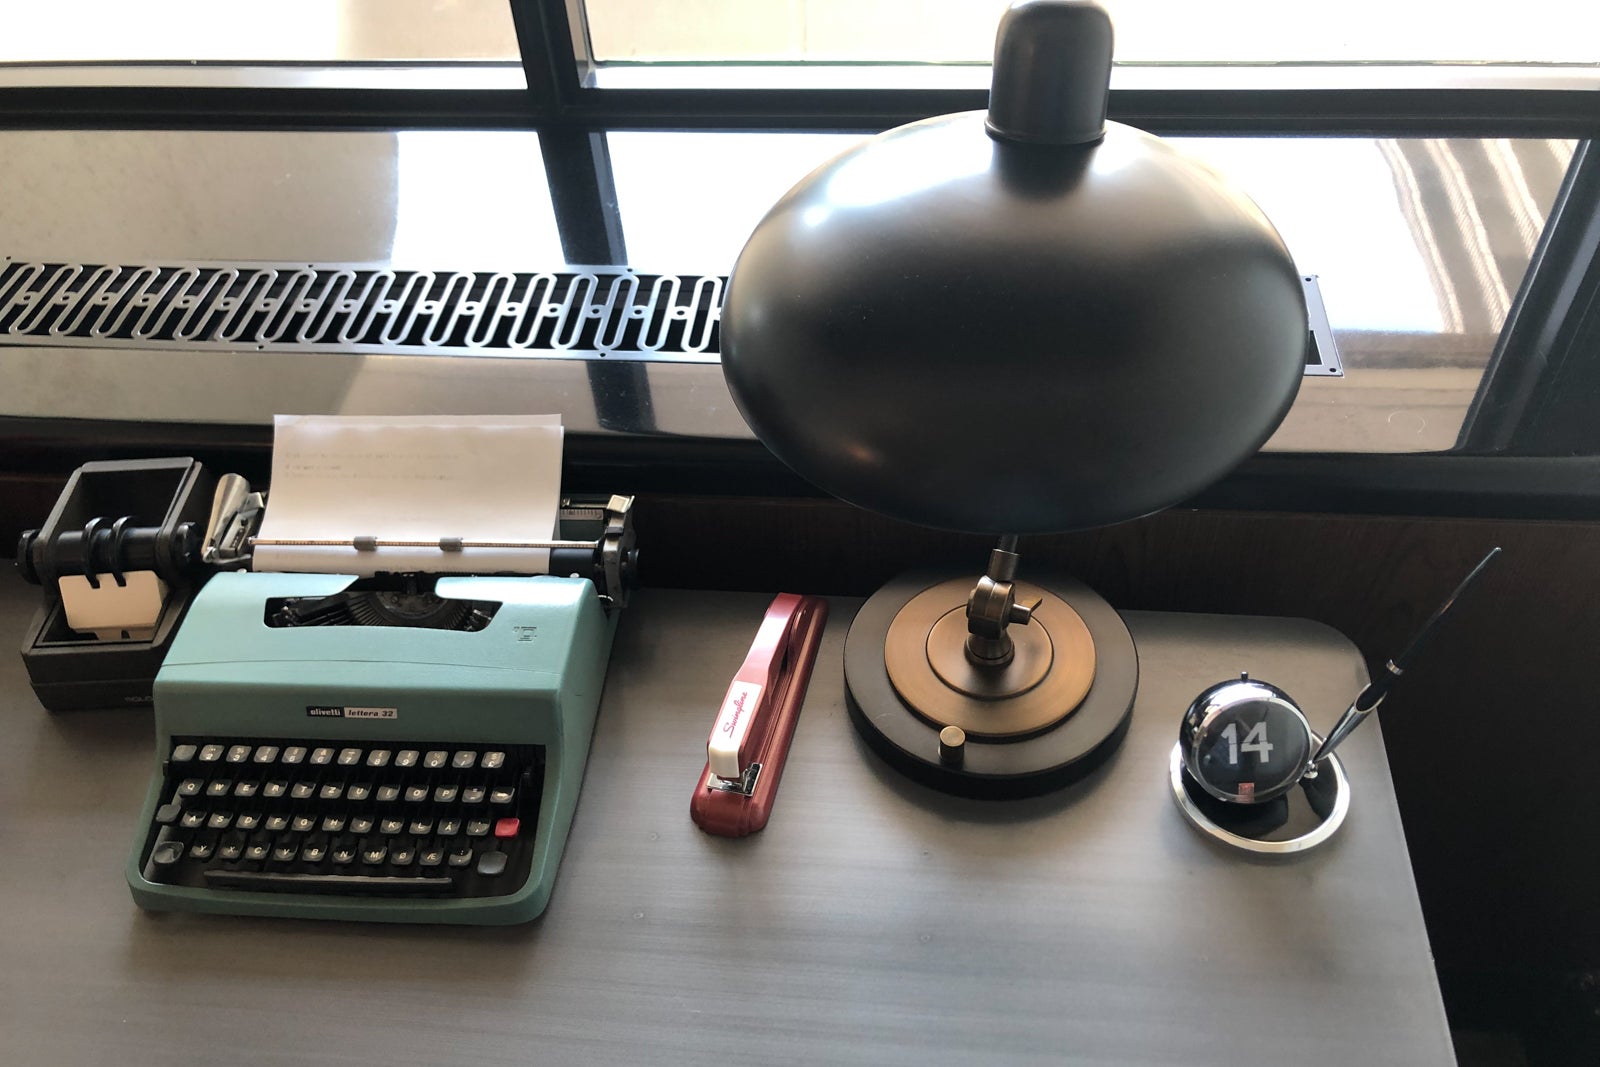 On top of the Scandal Room's antique desk, you'll spot a Rolodex, a period-appropriate lamp, a red stapler and an old-school typewriter.